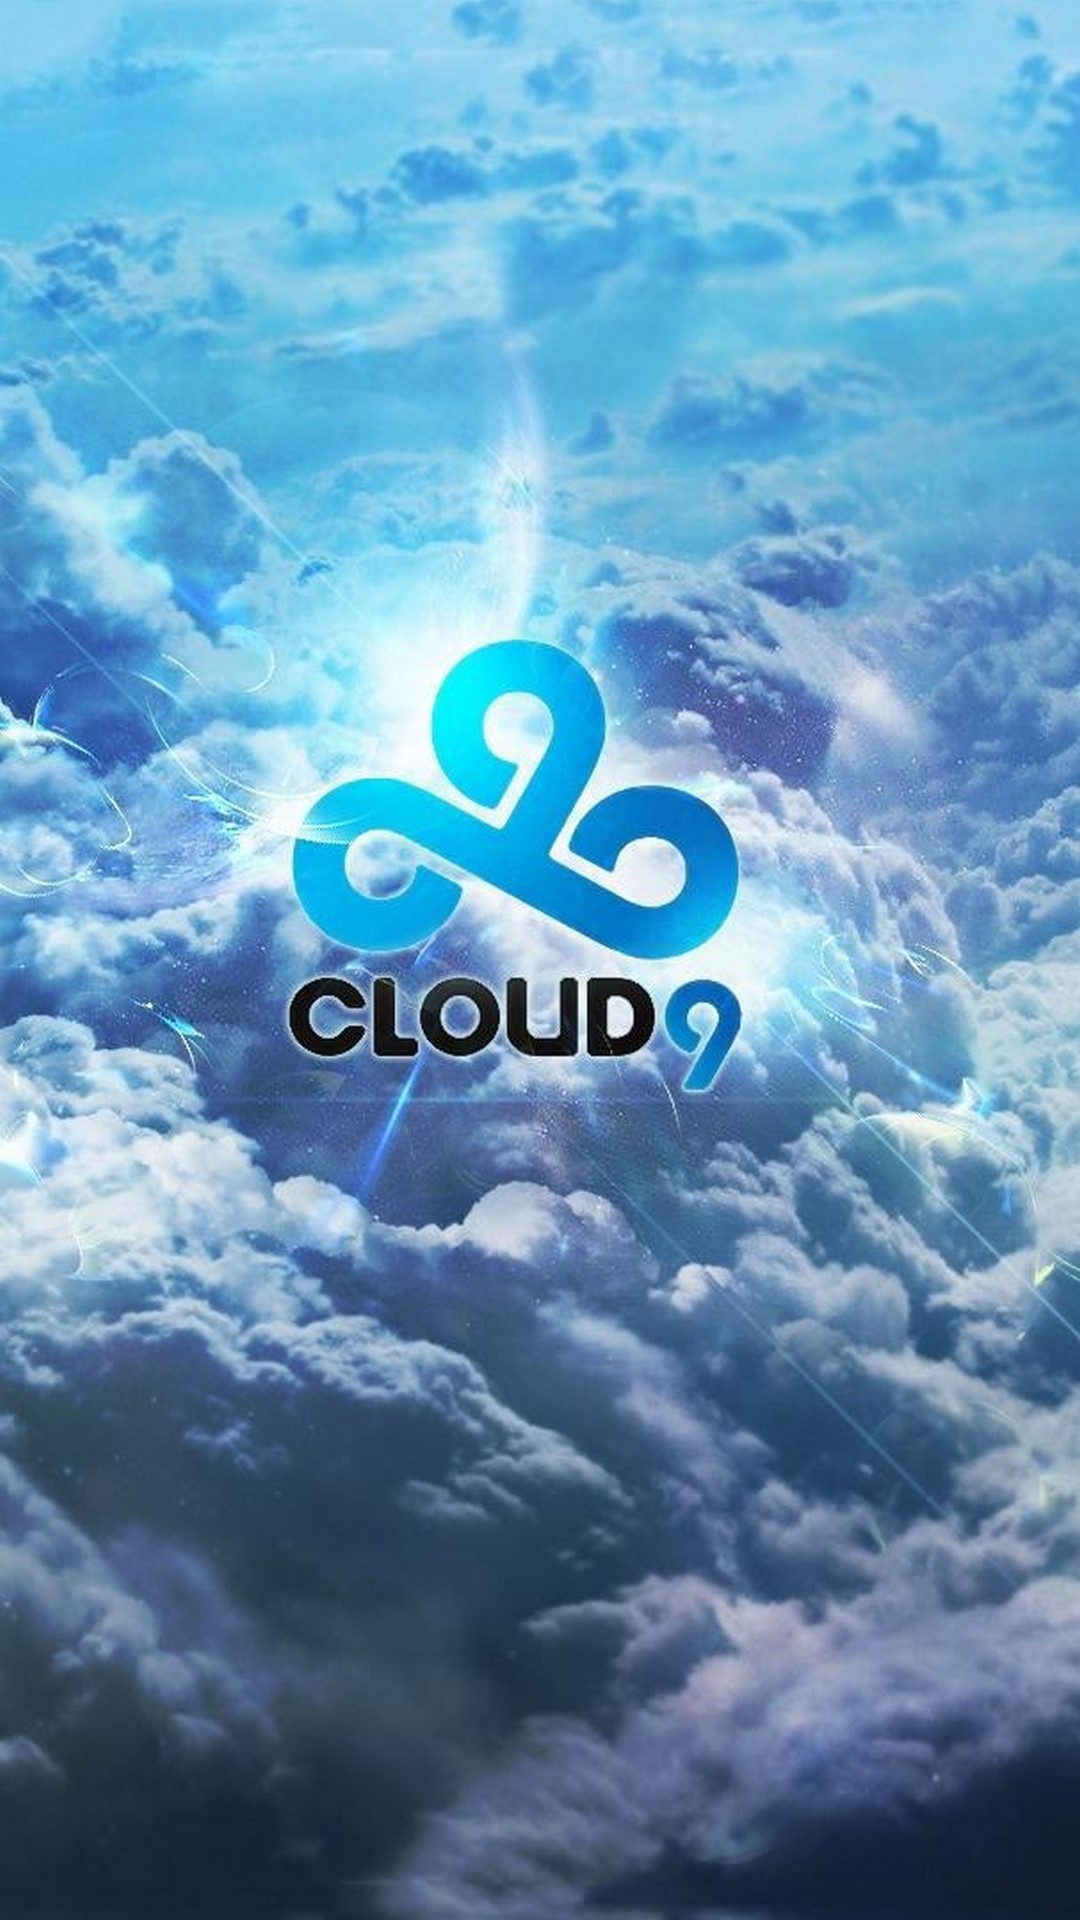 Android Wallpaper Hd Cloud 9 Games